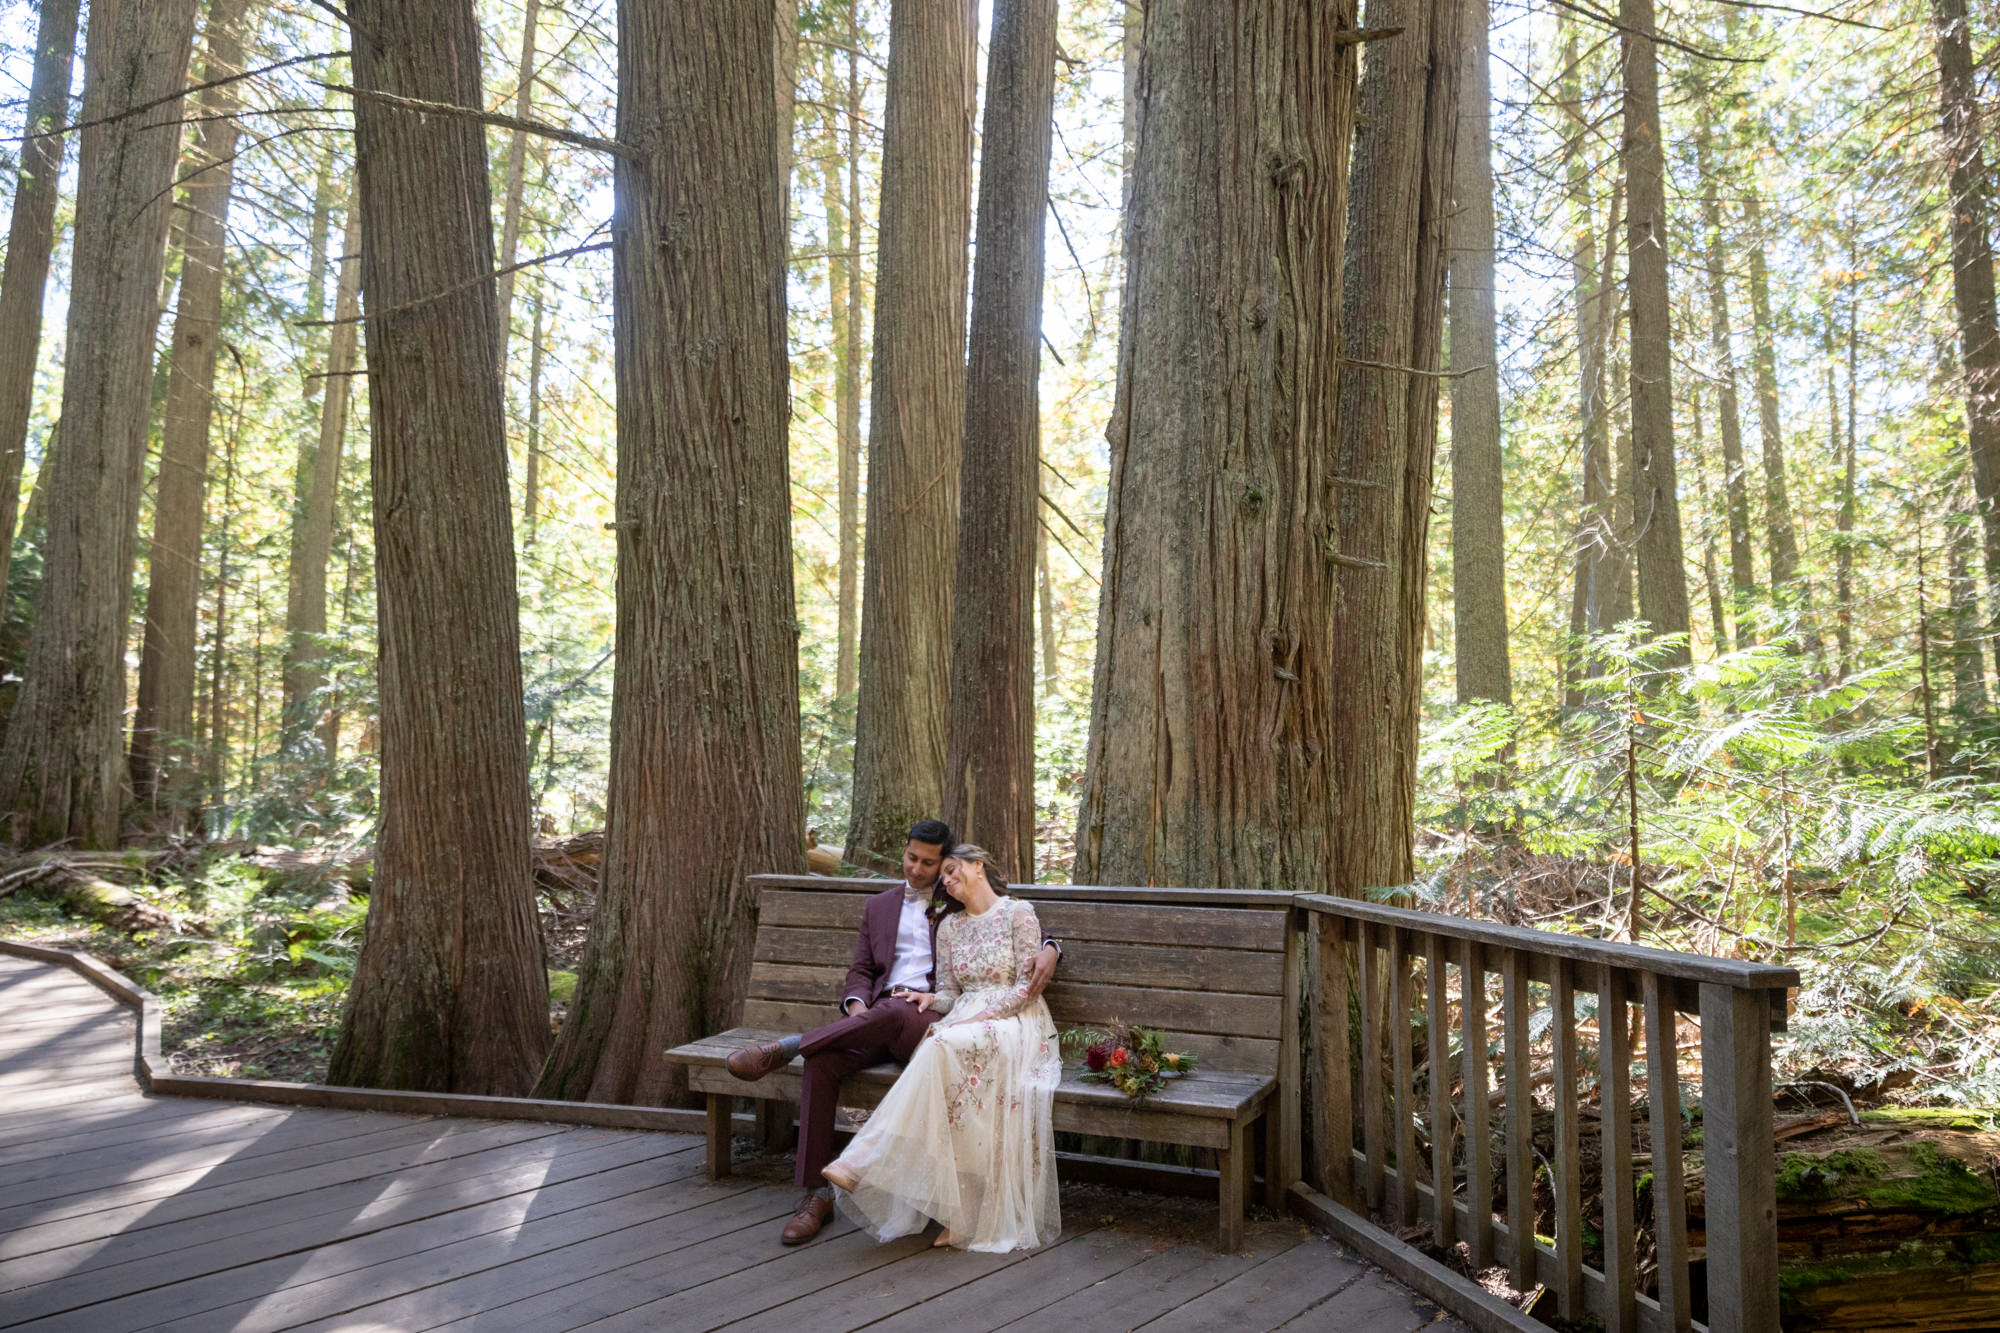 A bride in an offwhite dress with flowers on it, sits on a bench with her groom who is wearing a maroon suit surrounded by tall trees on their forest weddinng day.